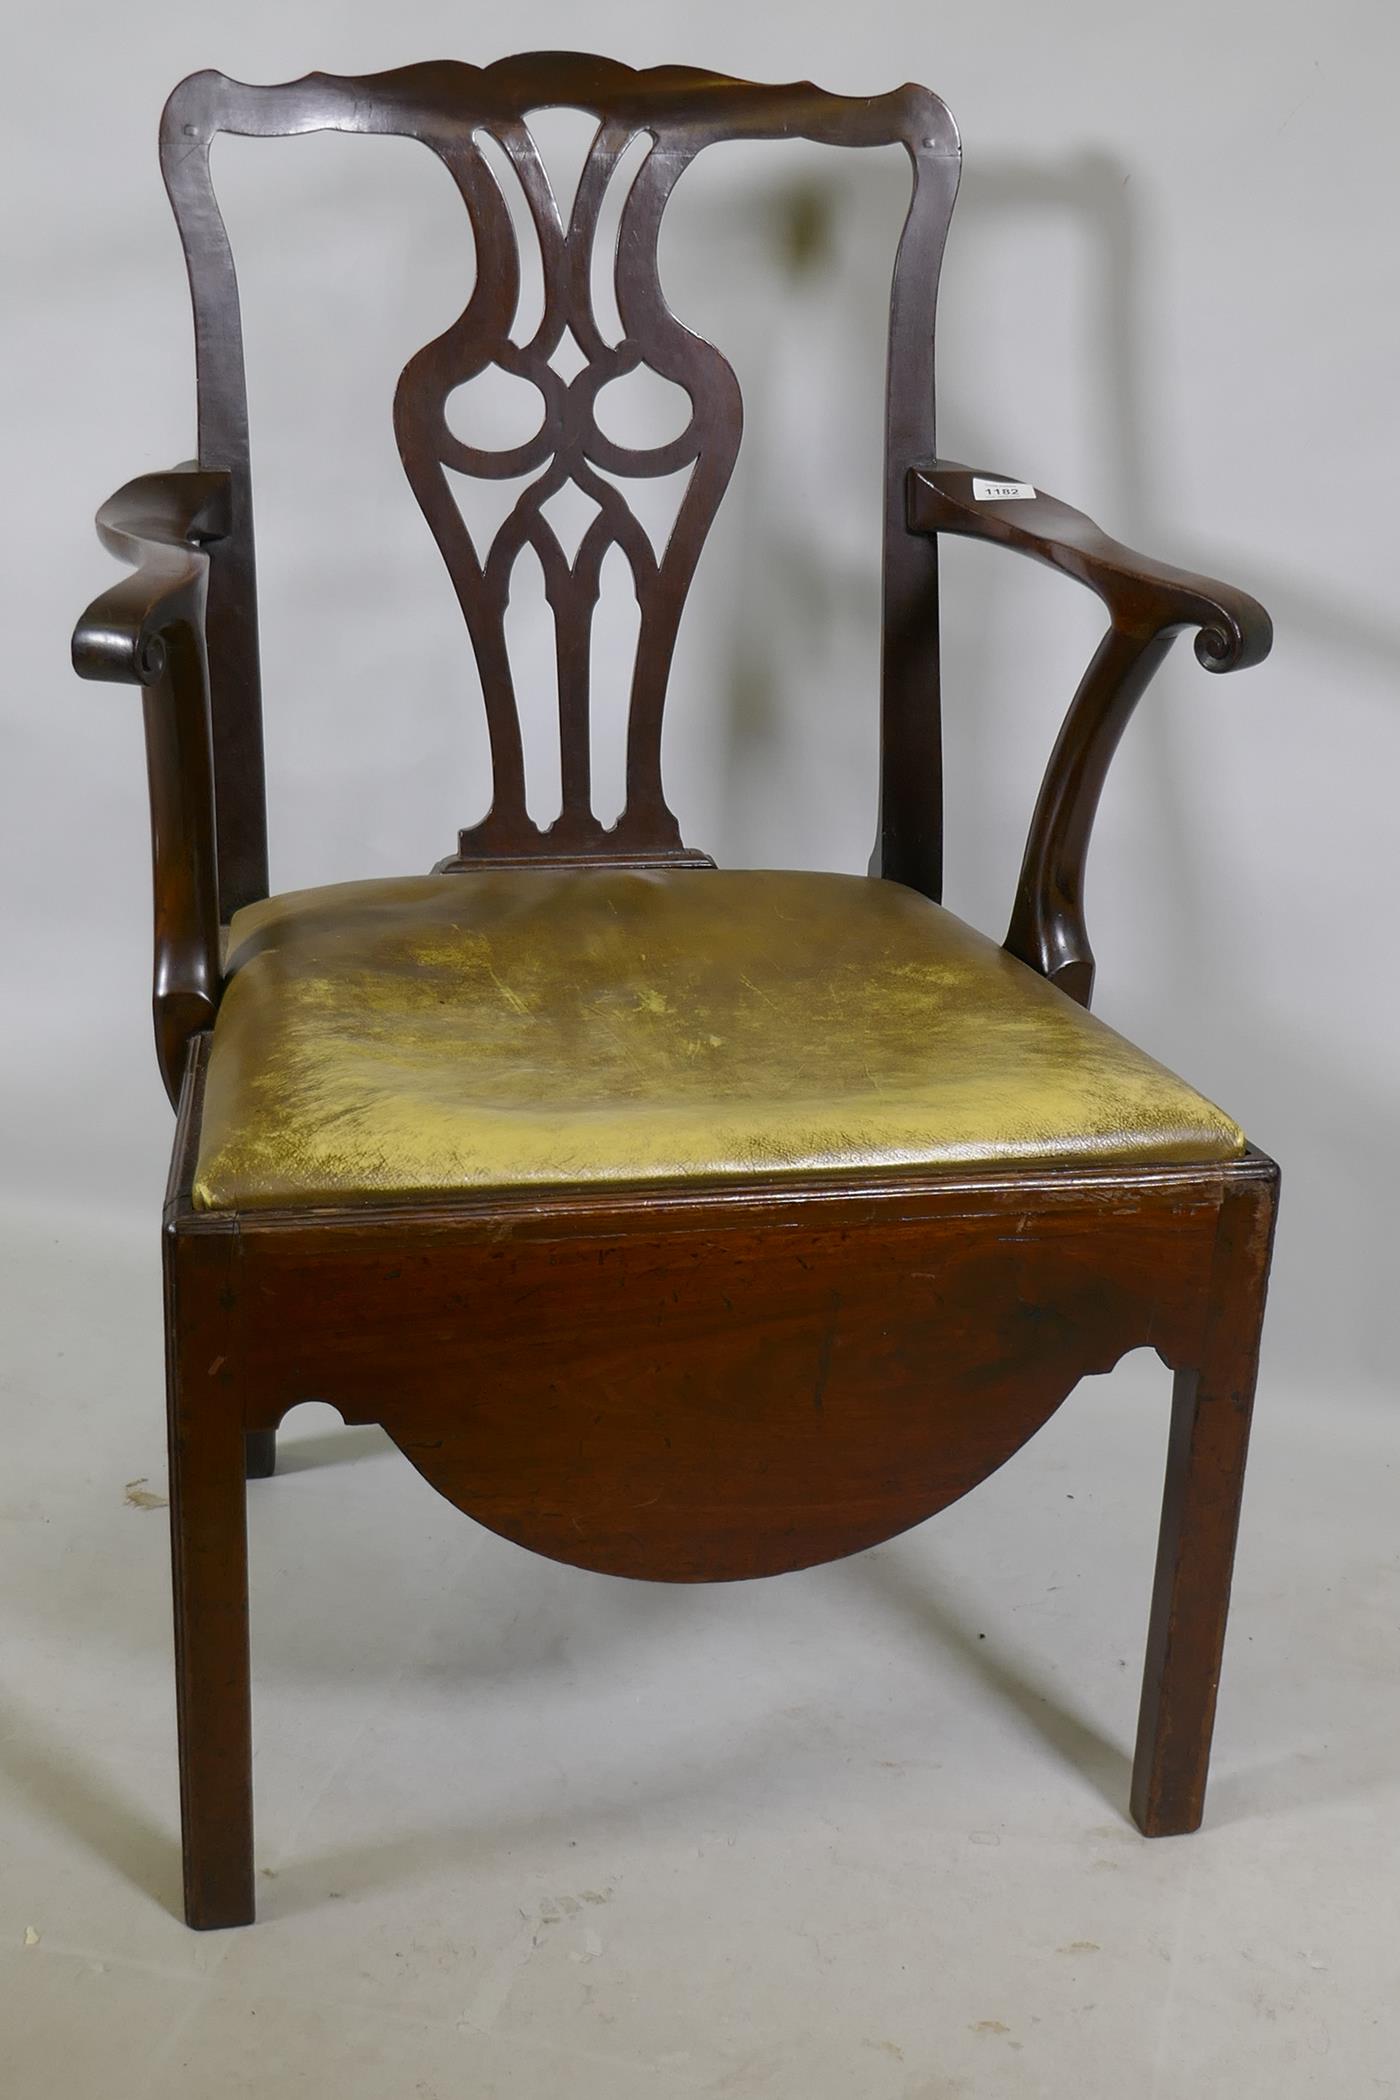 A Georgian mahogany Chippendale style elbow chair with pierced splat back, scroll arms and drop in - Image 2 of 2